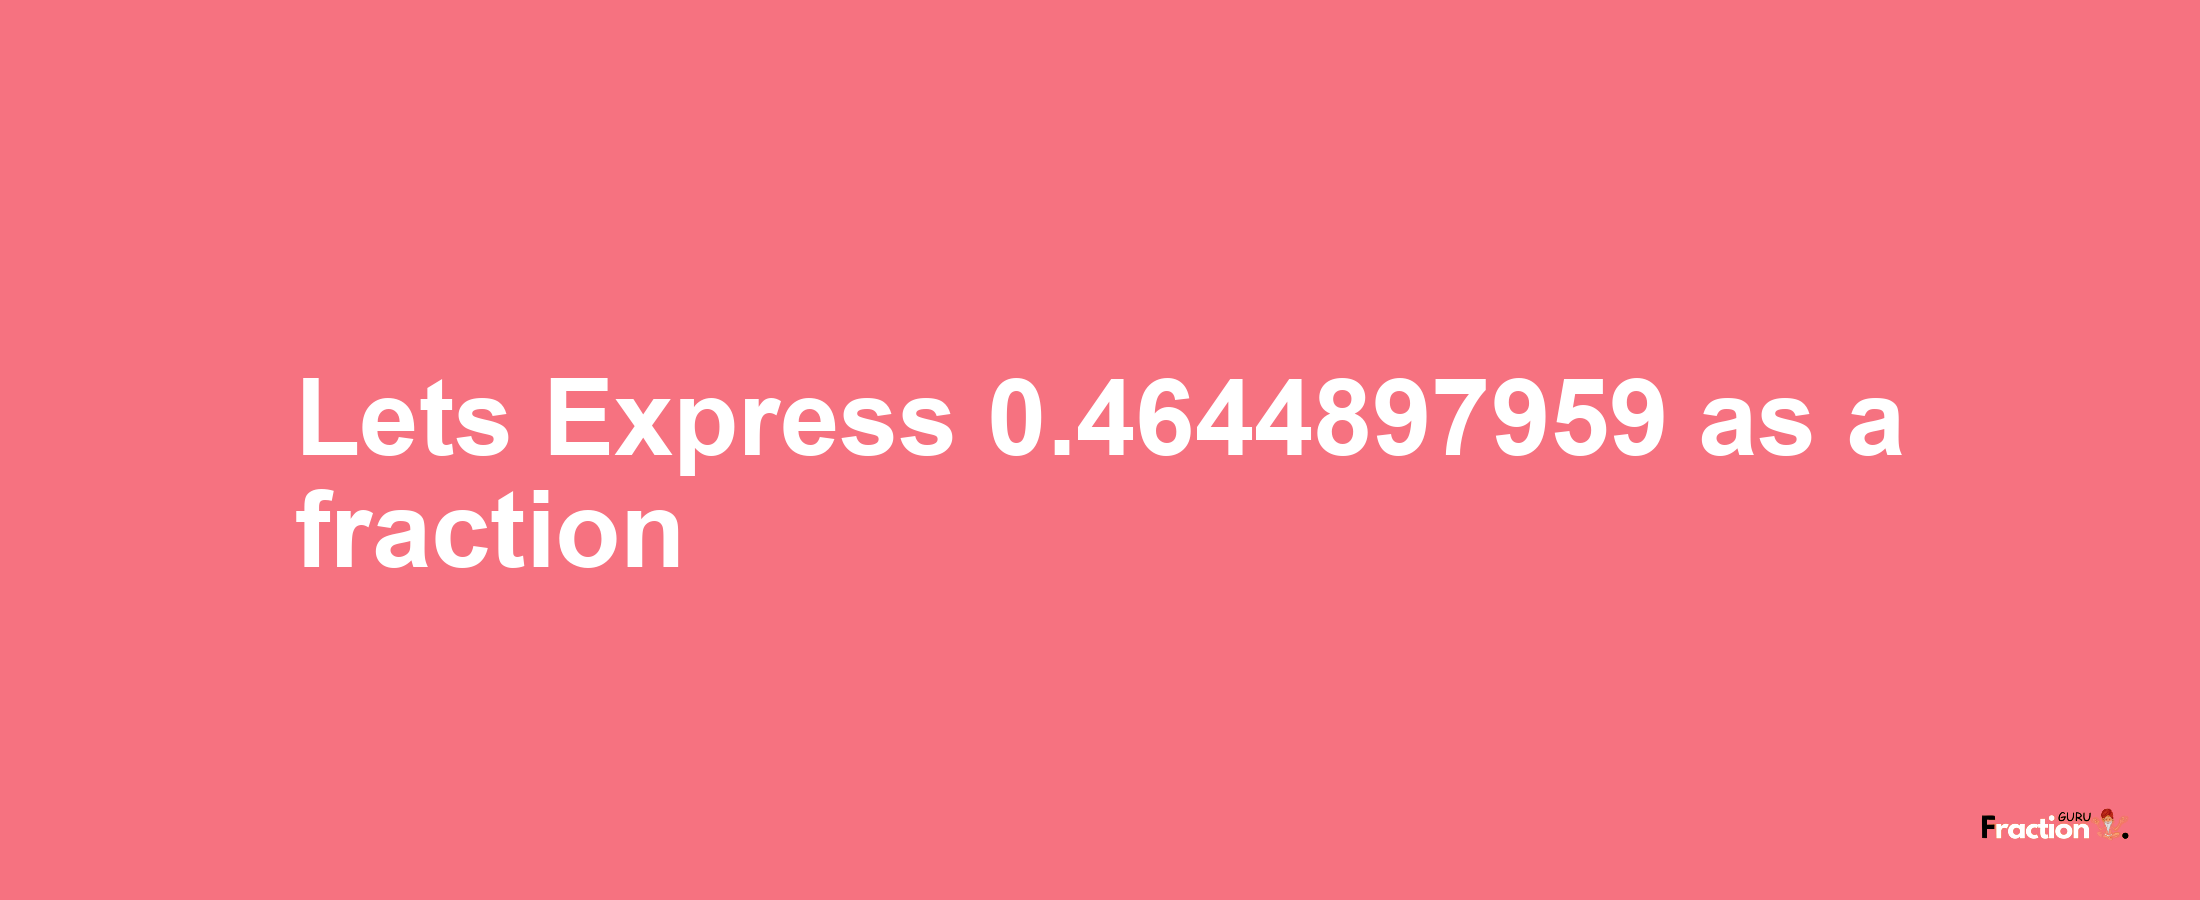 Lets Express 0.4644897959 as afraction